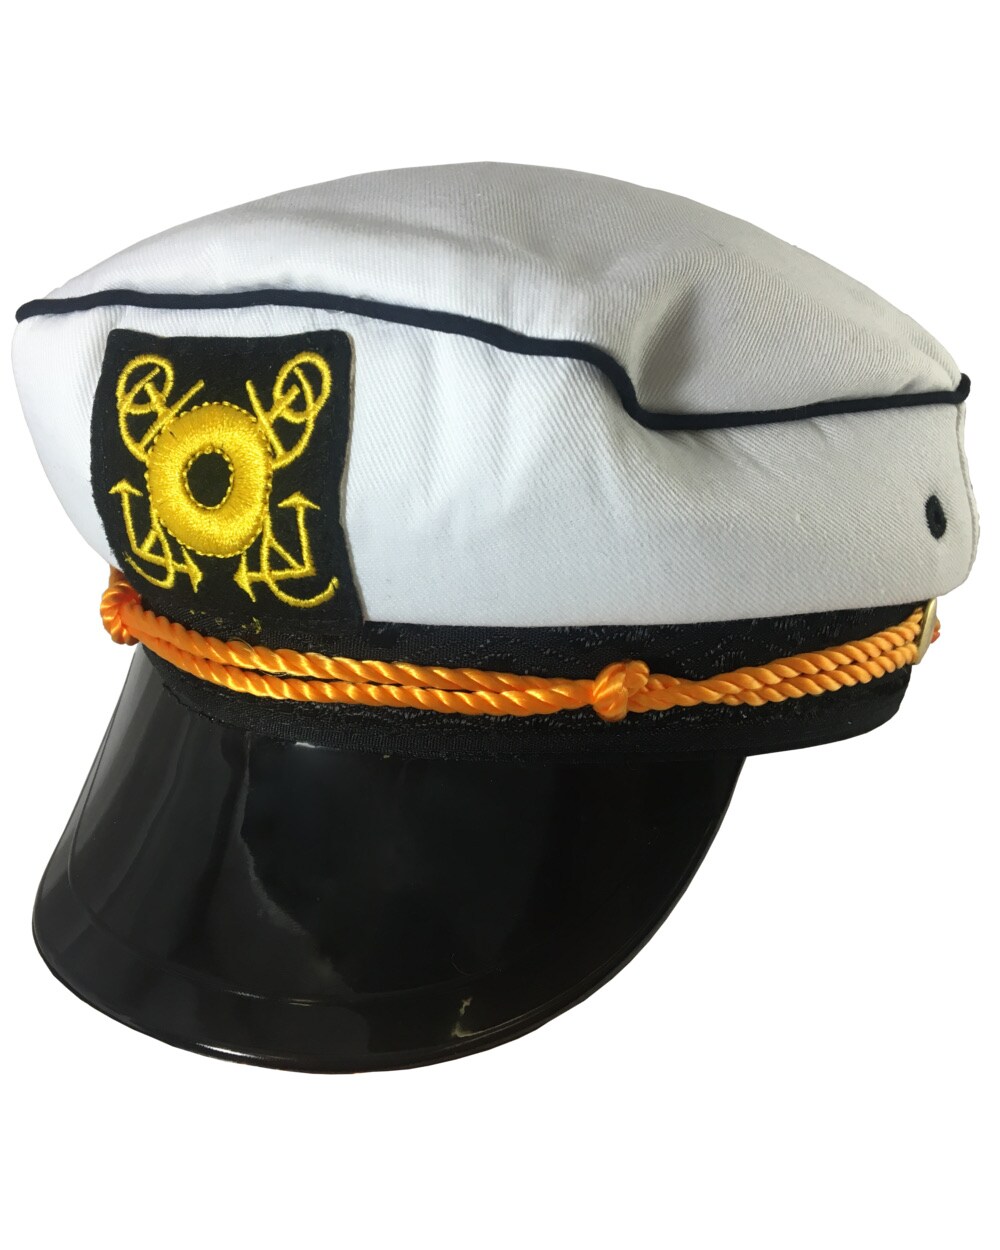 Adults Adjustable Yacht Boat Captain's Sailing Hat Cap Costume Accessory